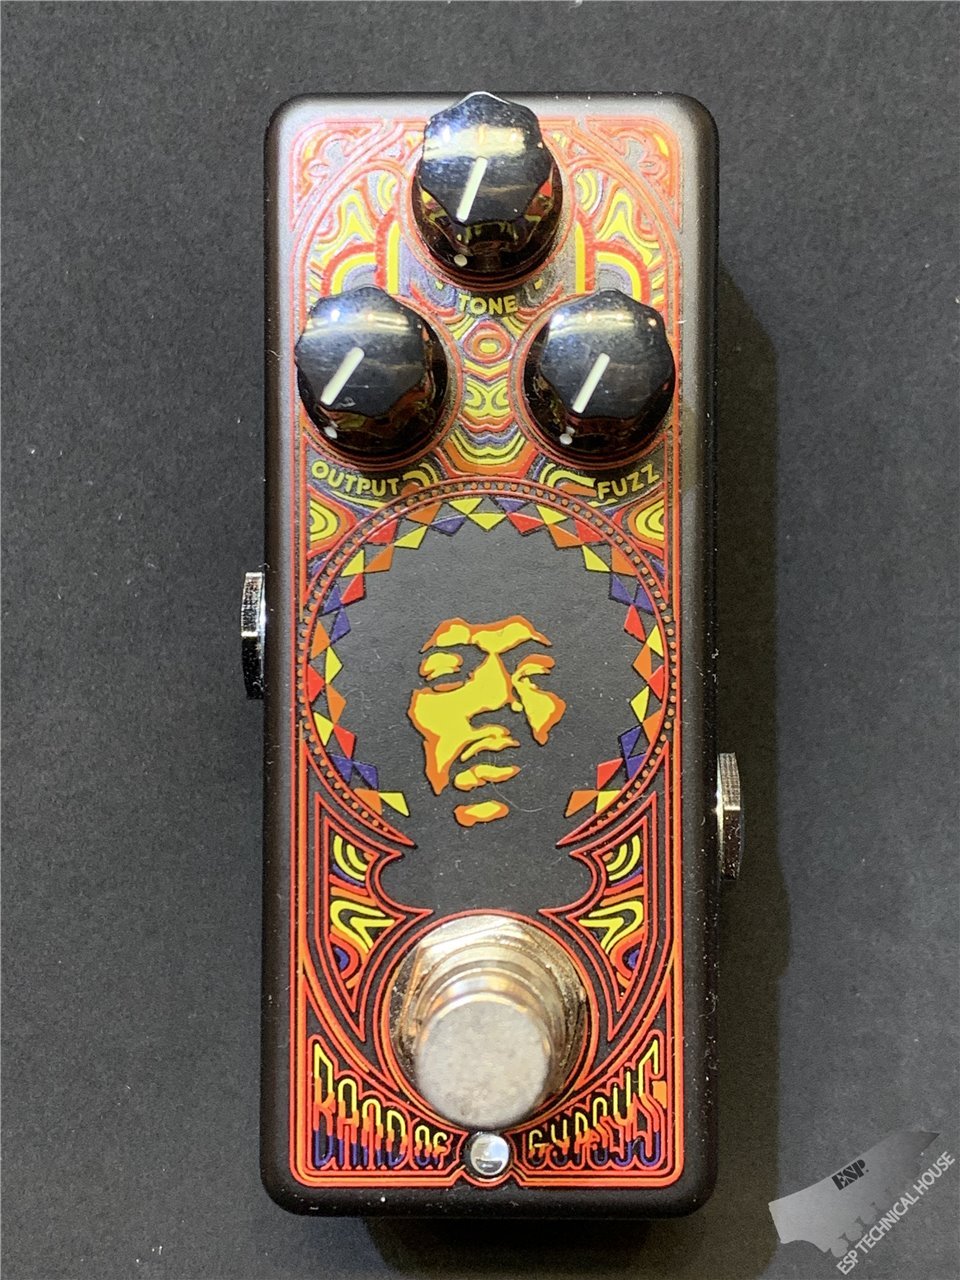 Jim Dunlop JHW4 Authentic Hendrix '69 Psych Series Band Of Gypsys 